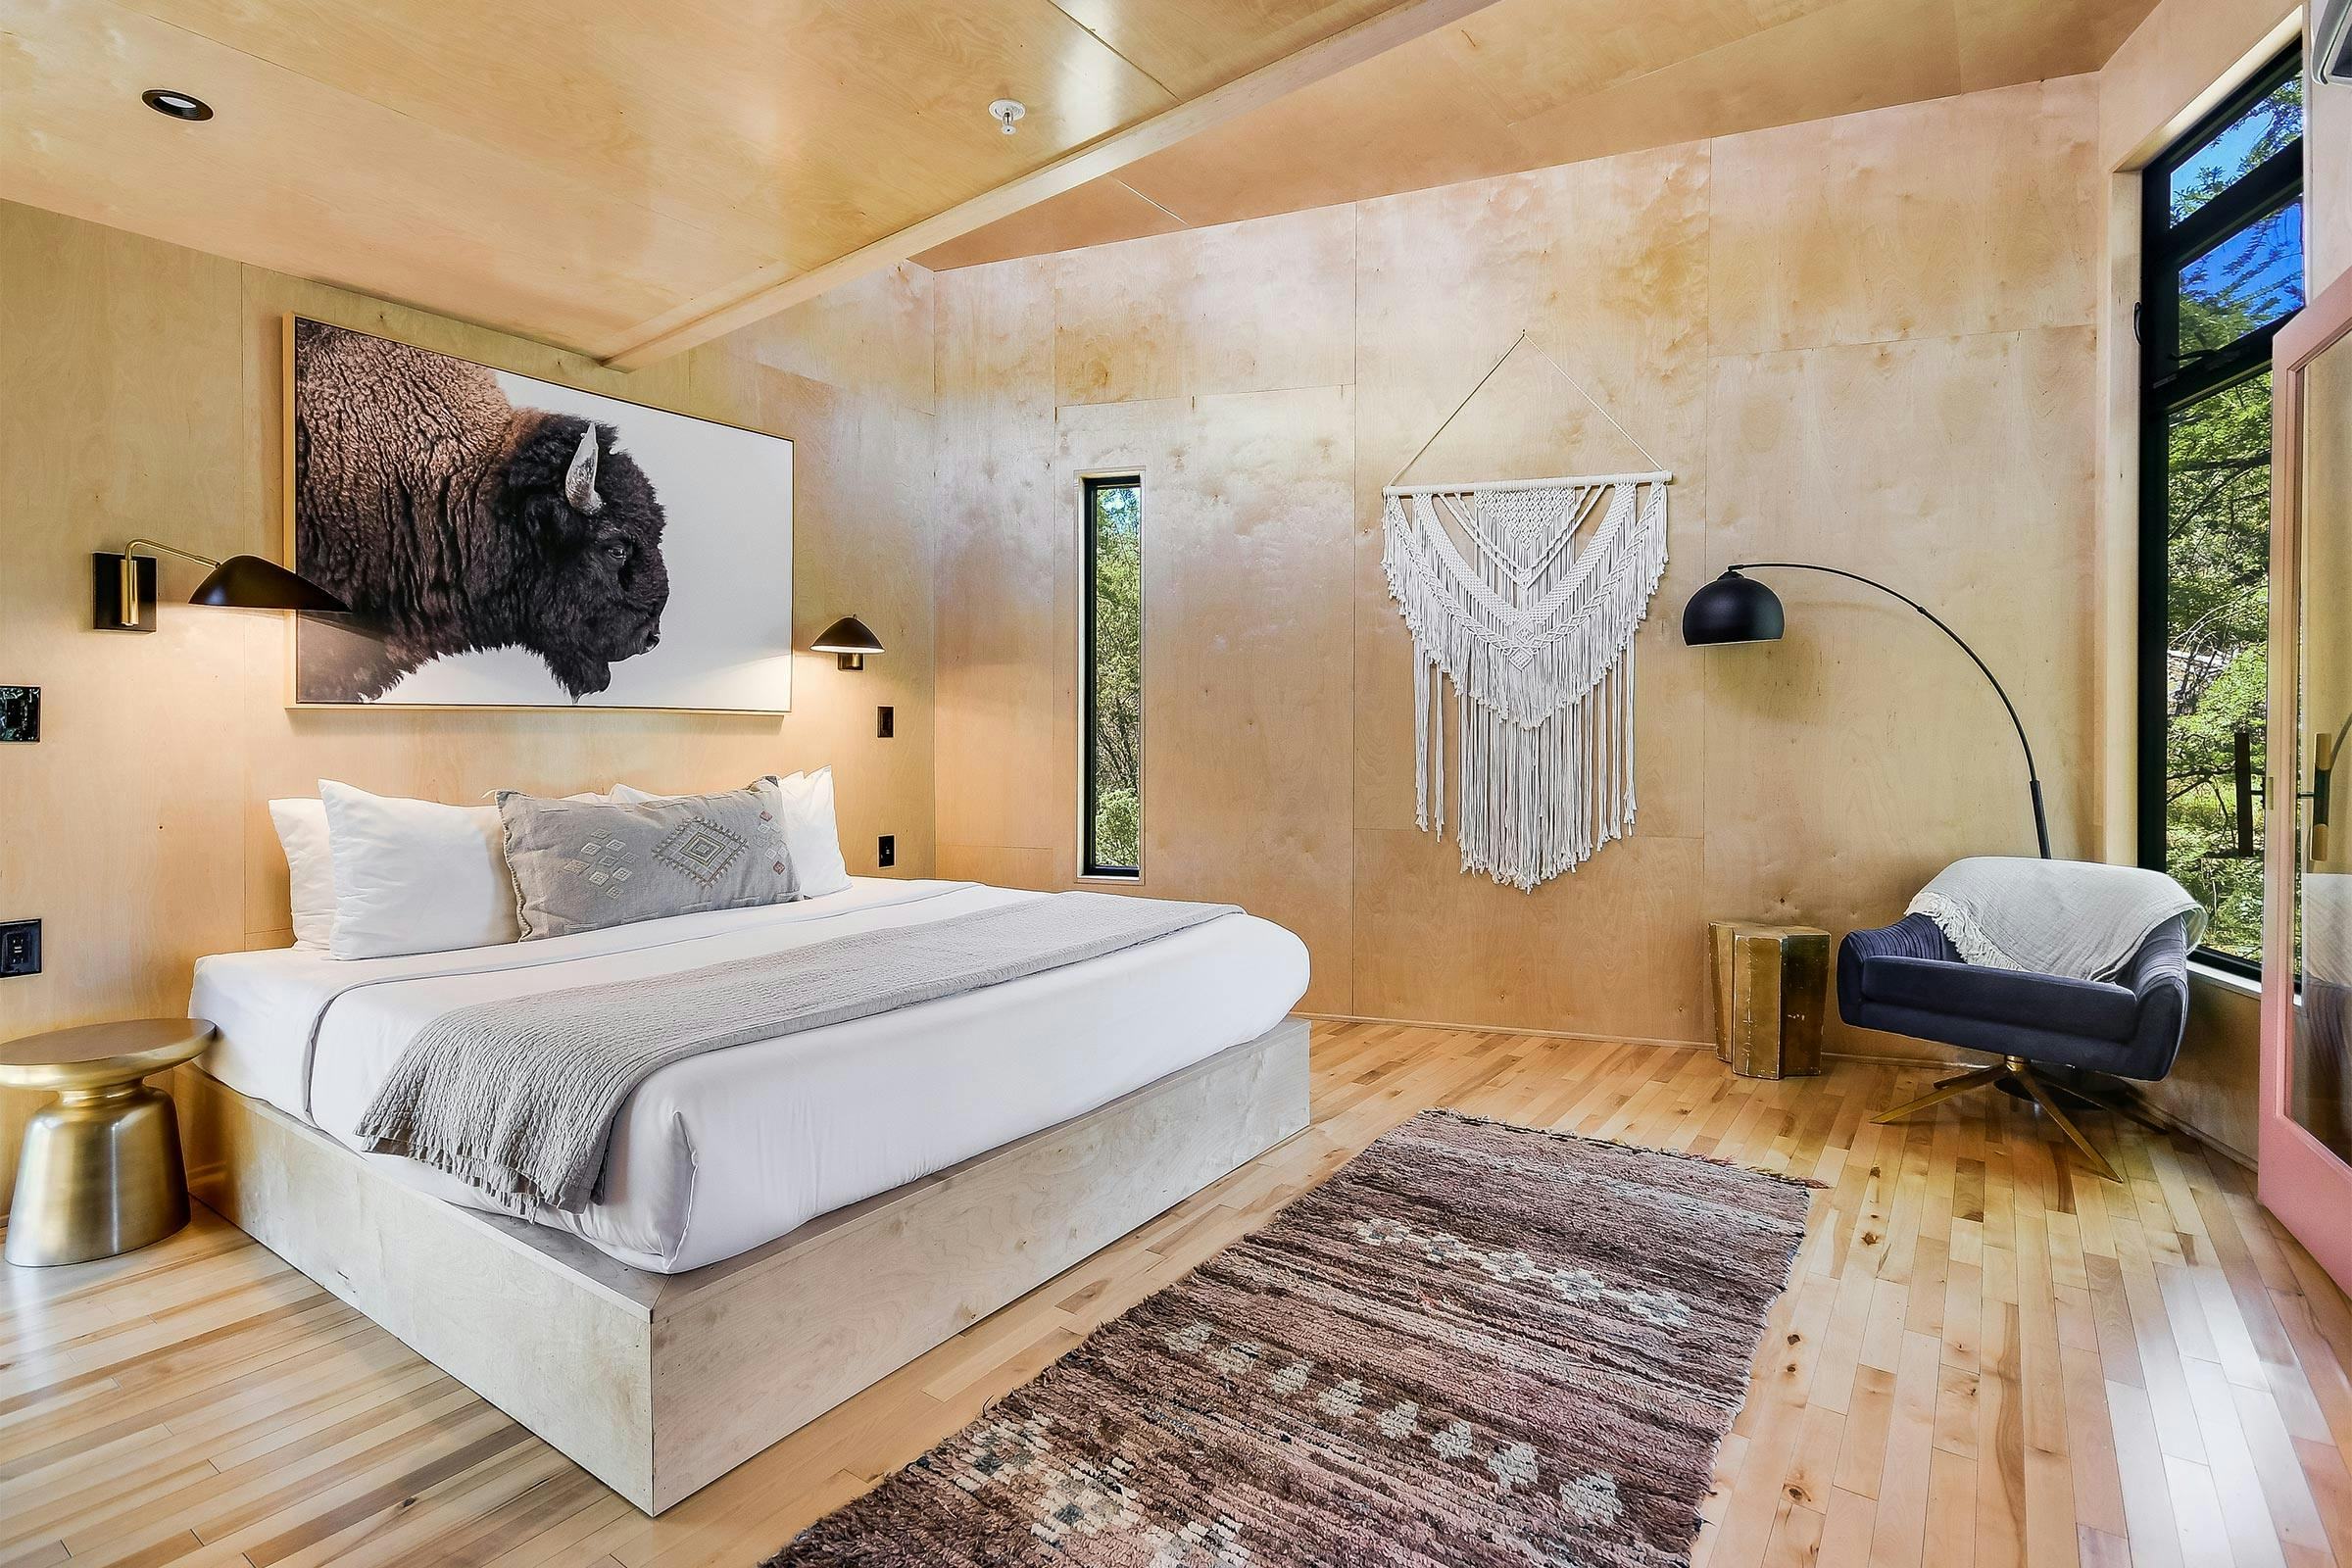 Modern, minimalist style at Cypress Valley Treehouse Rentals.